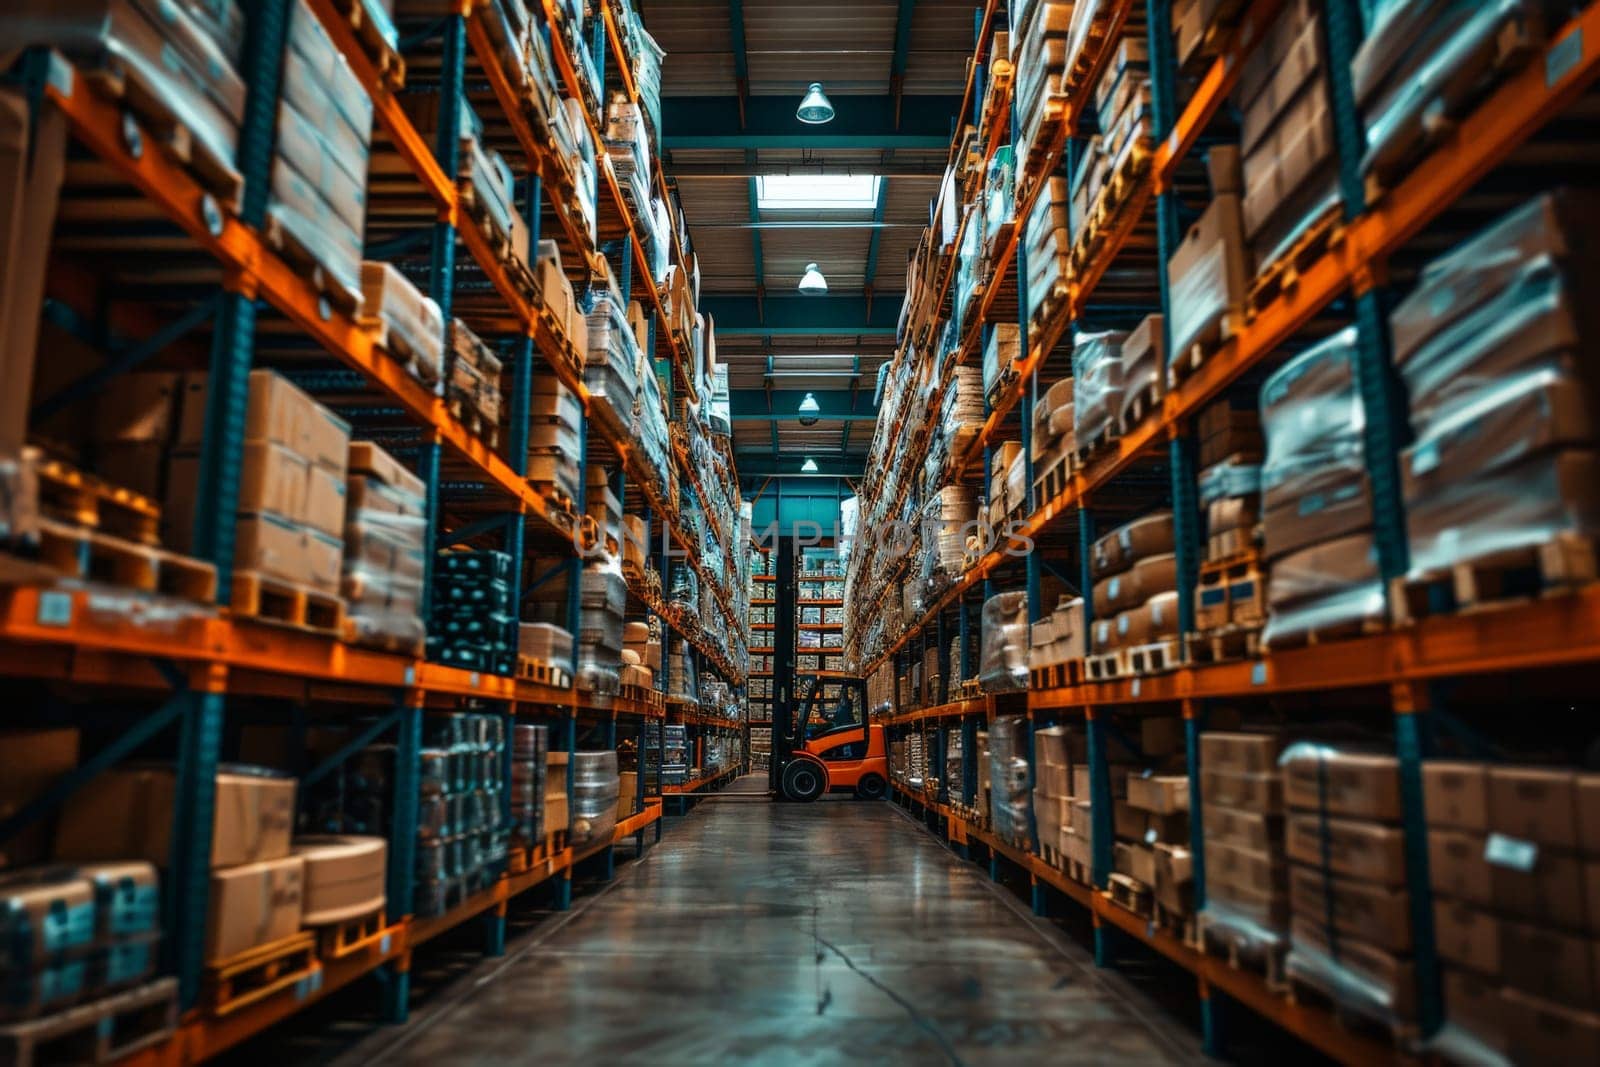 A Retail warehouse full of shelves with goods in cartons, with pallets and forklifts.